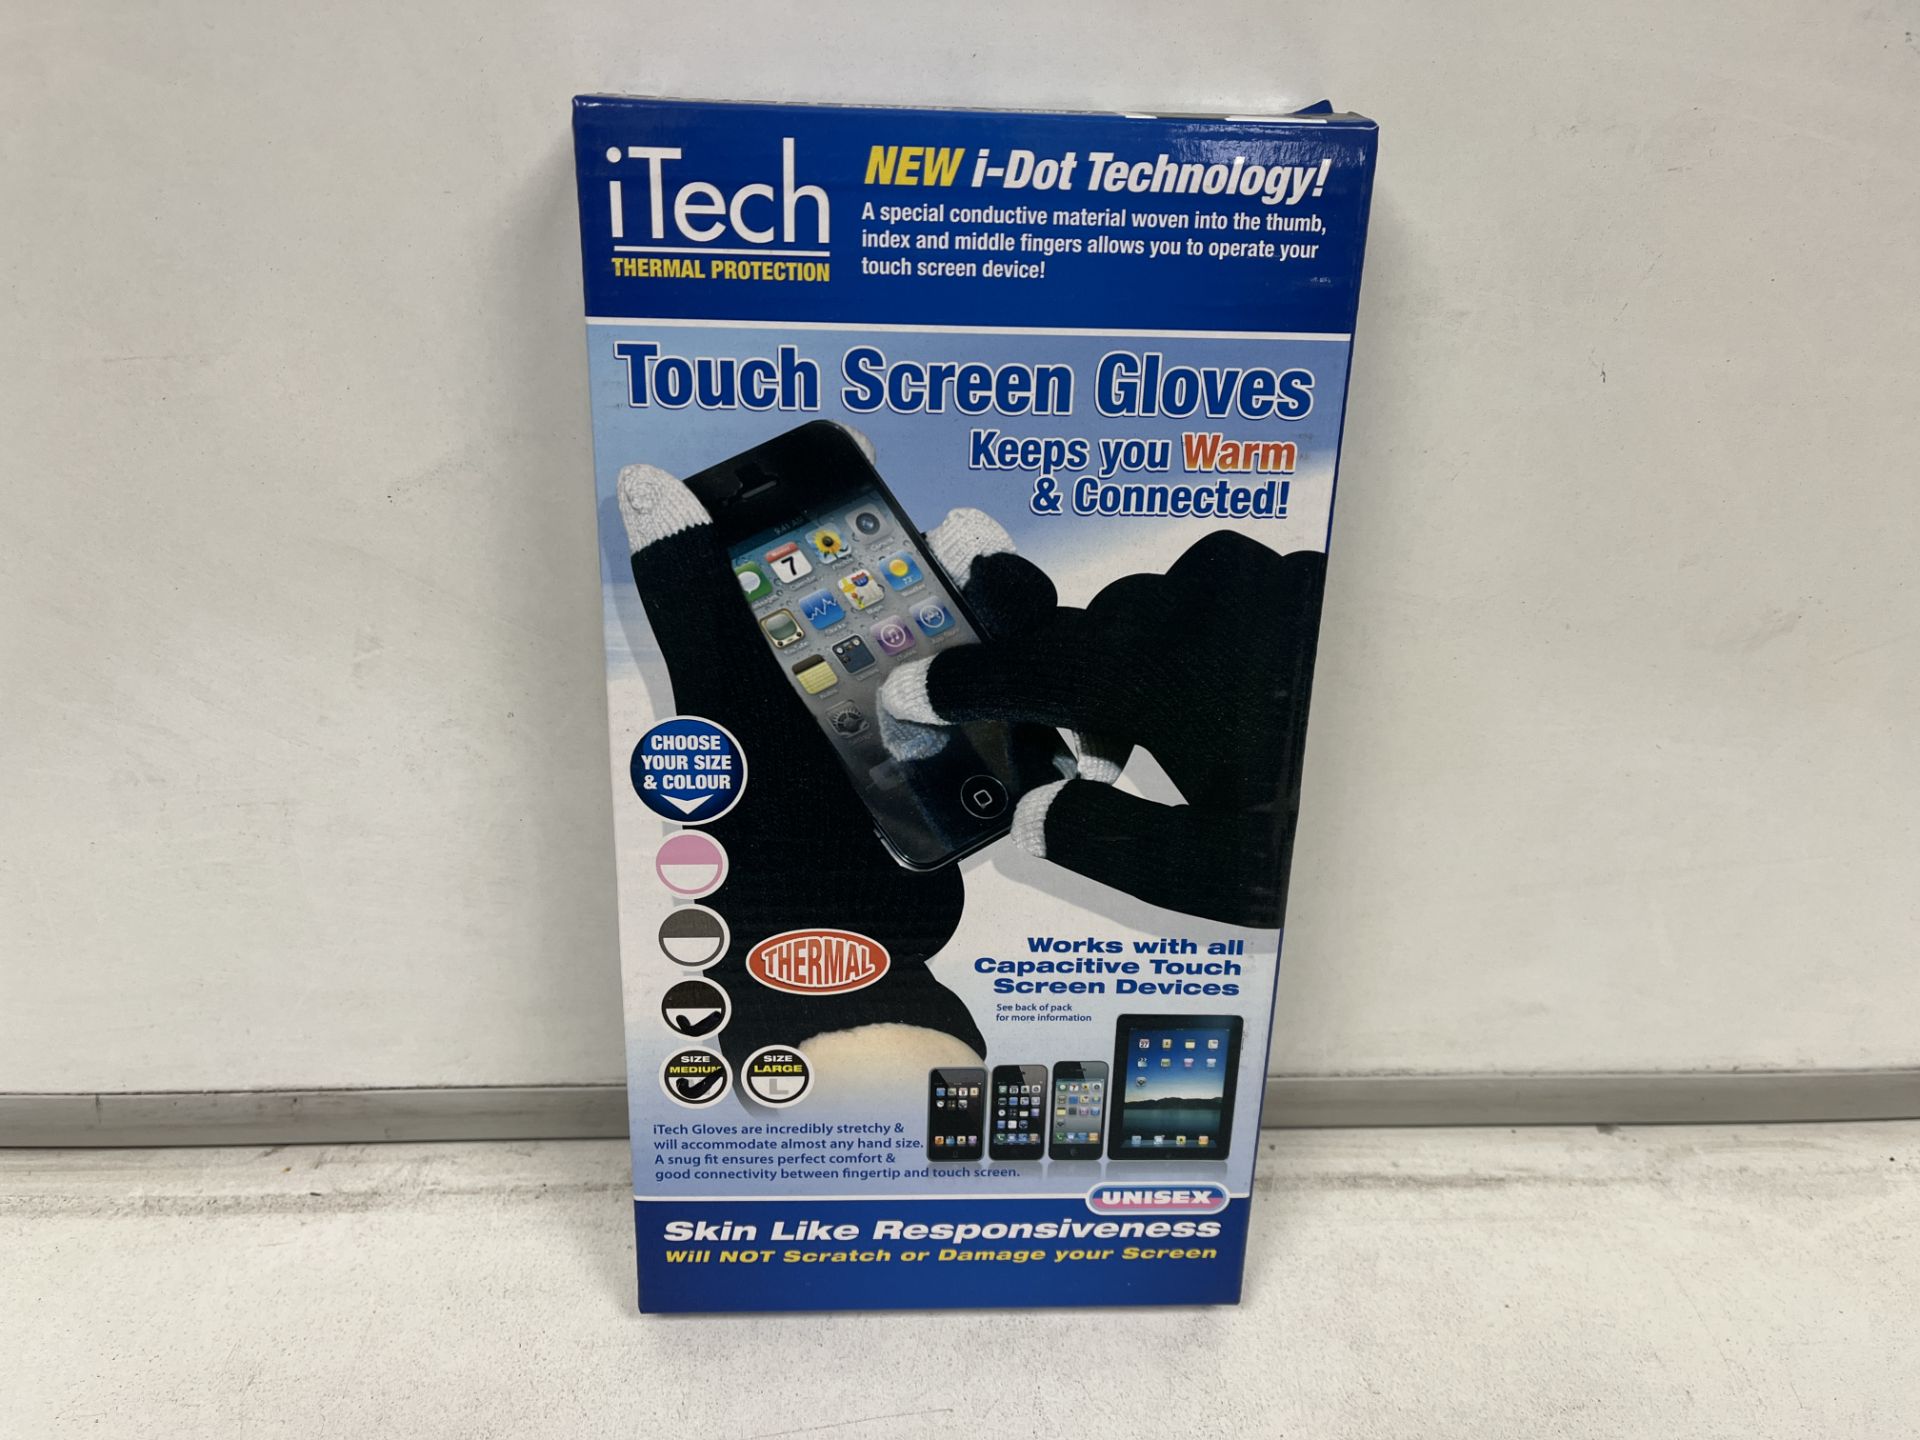 48 X BRAND NEW ITECH TOUCH SCREEN GLOVES R17-3